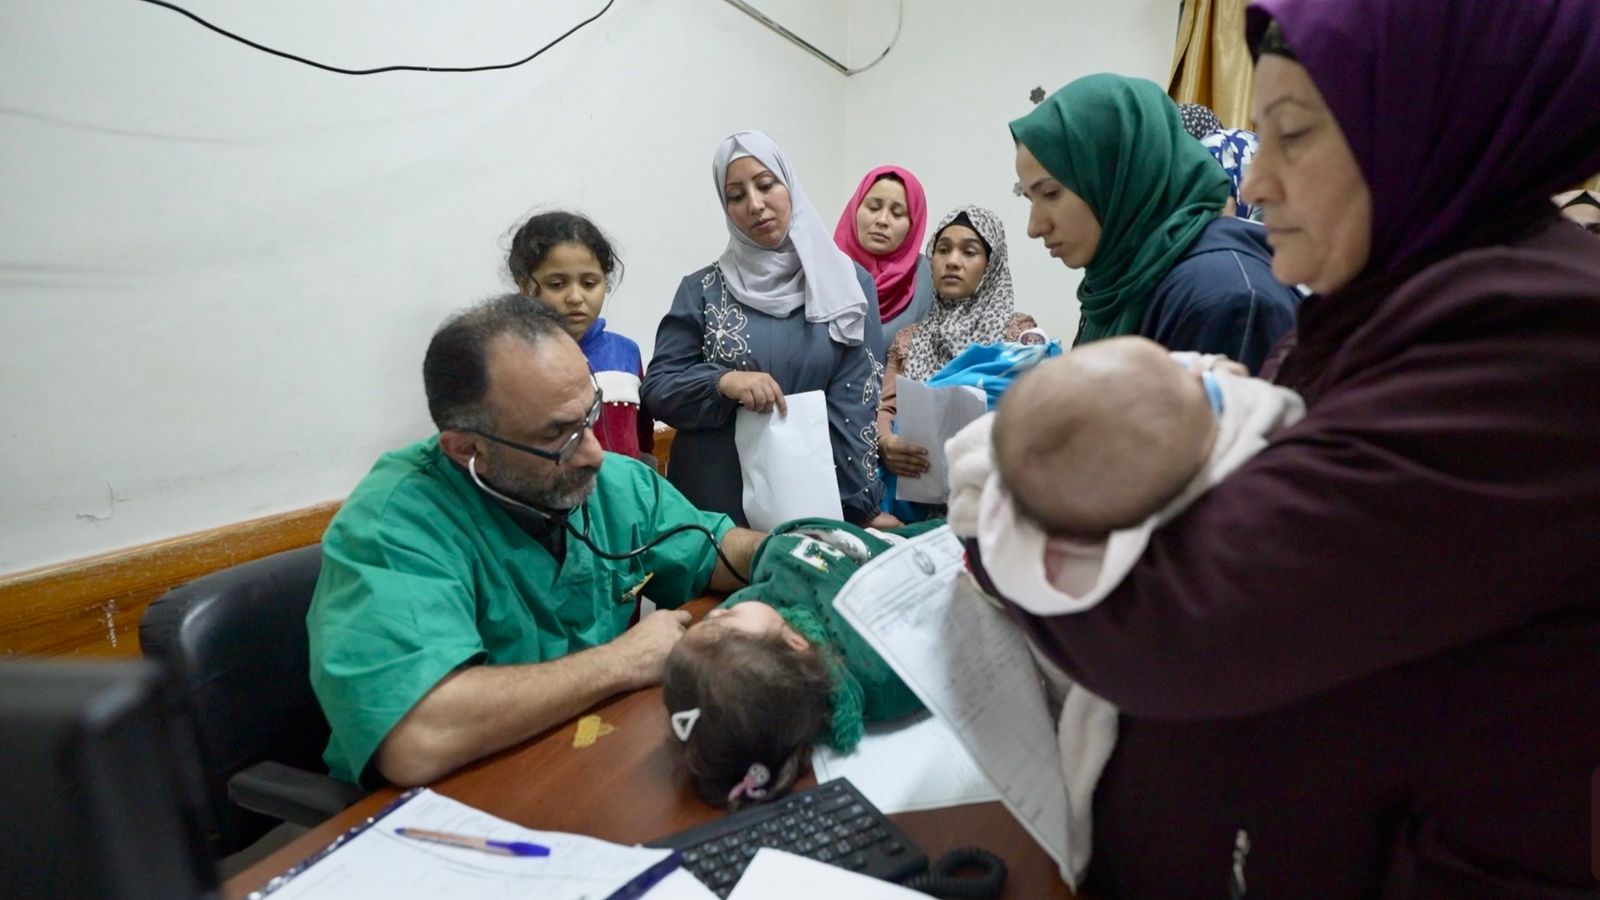 An end to the Israel-Hamas truce approaches - but the people of Gaza are desperate for help